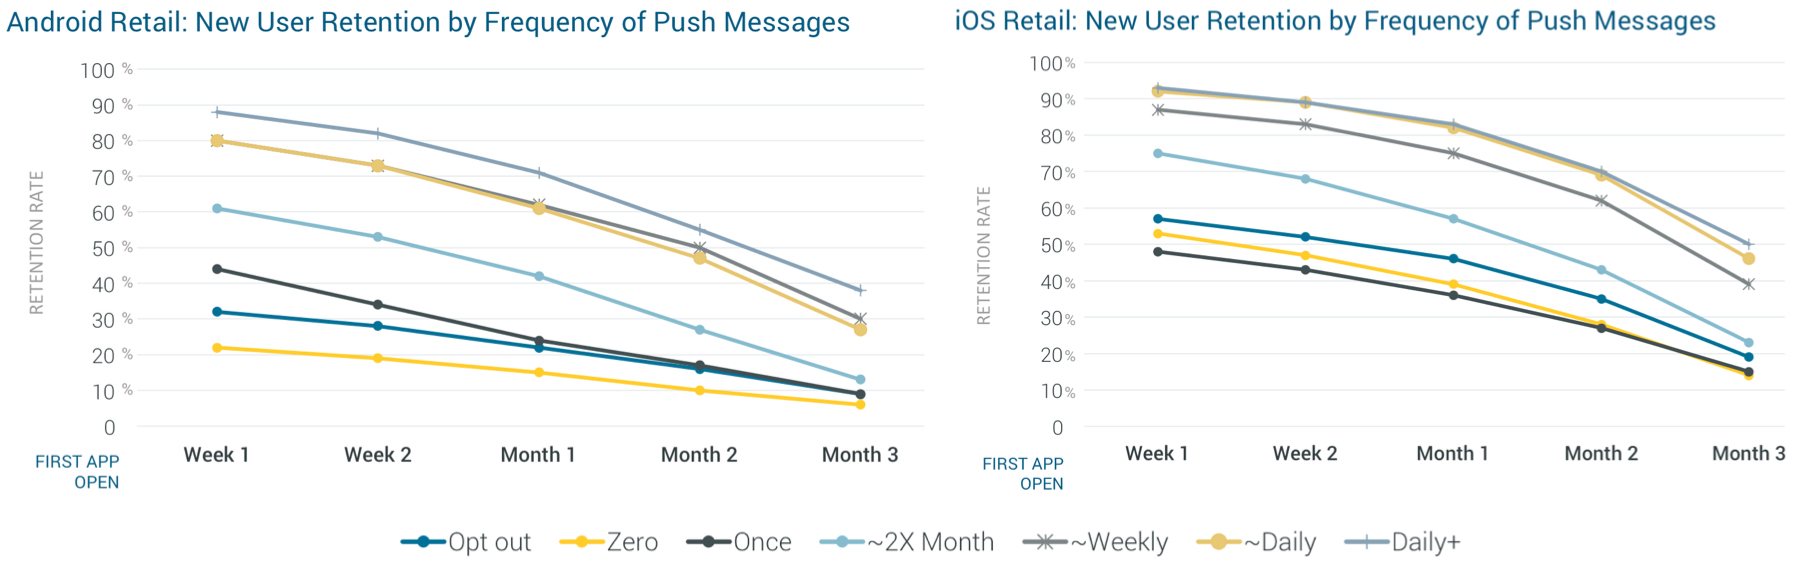 New User Retention by Frequency of Push Messages (Android and iOS)